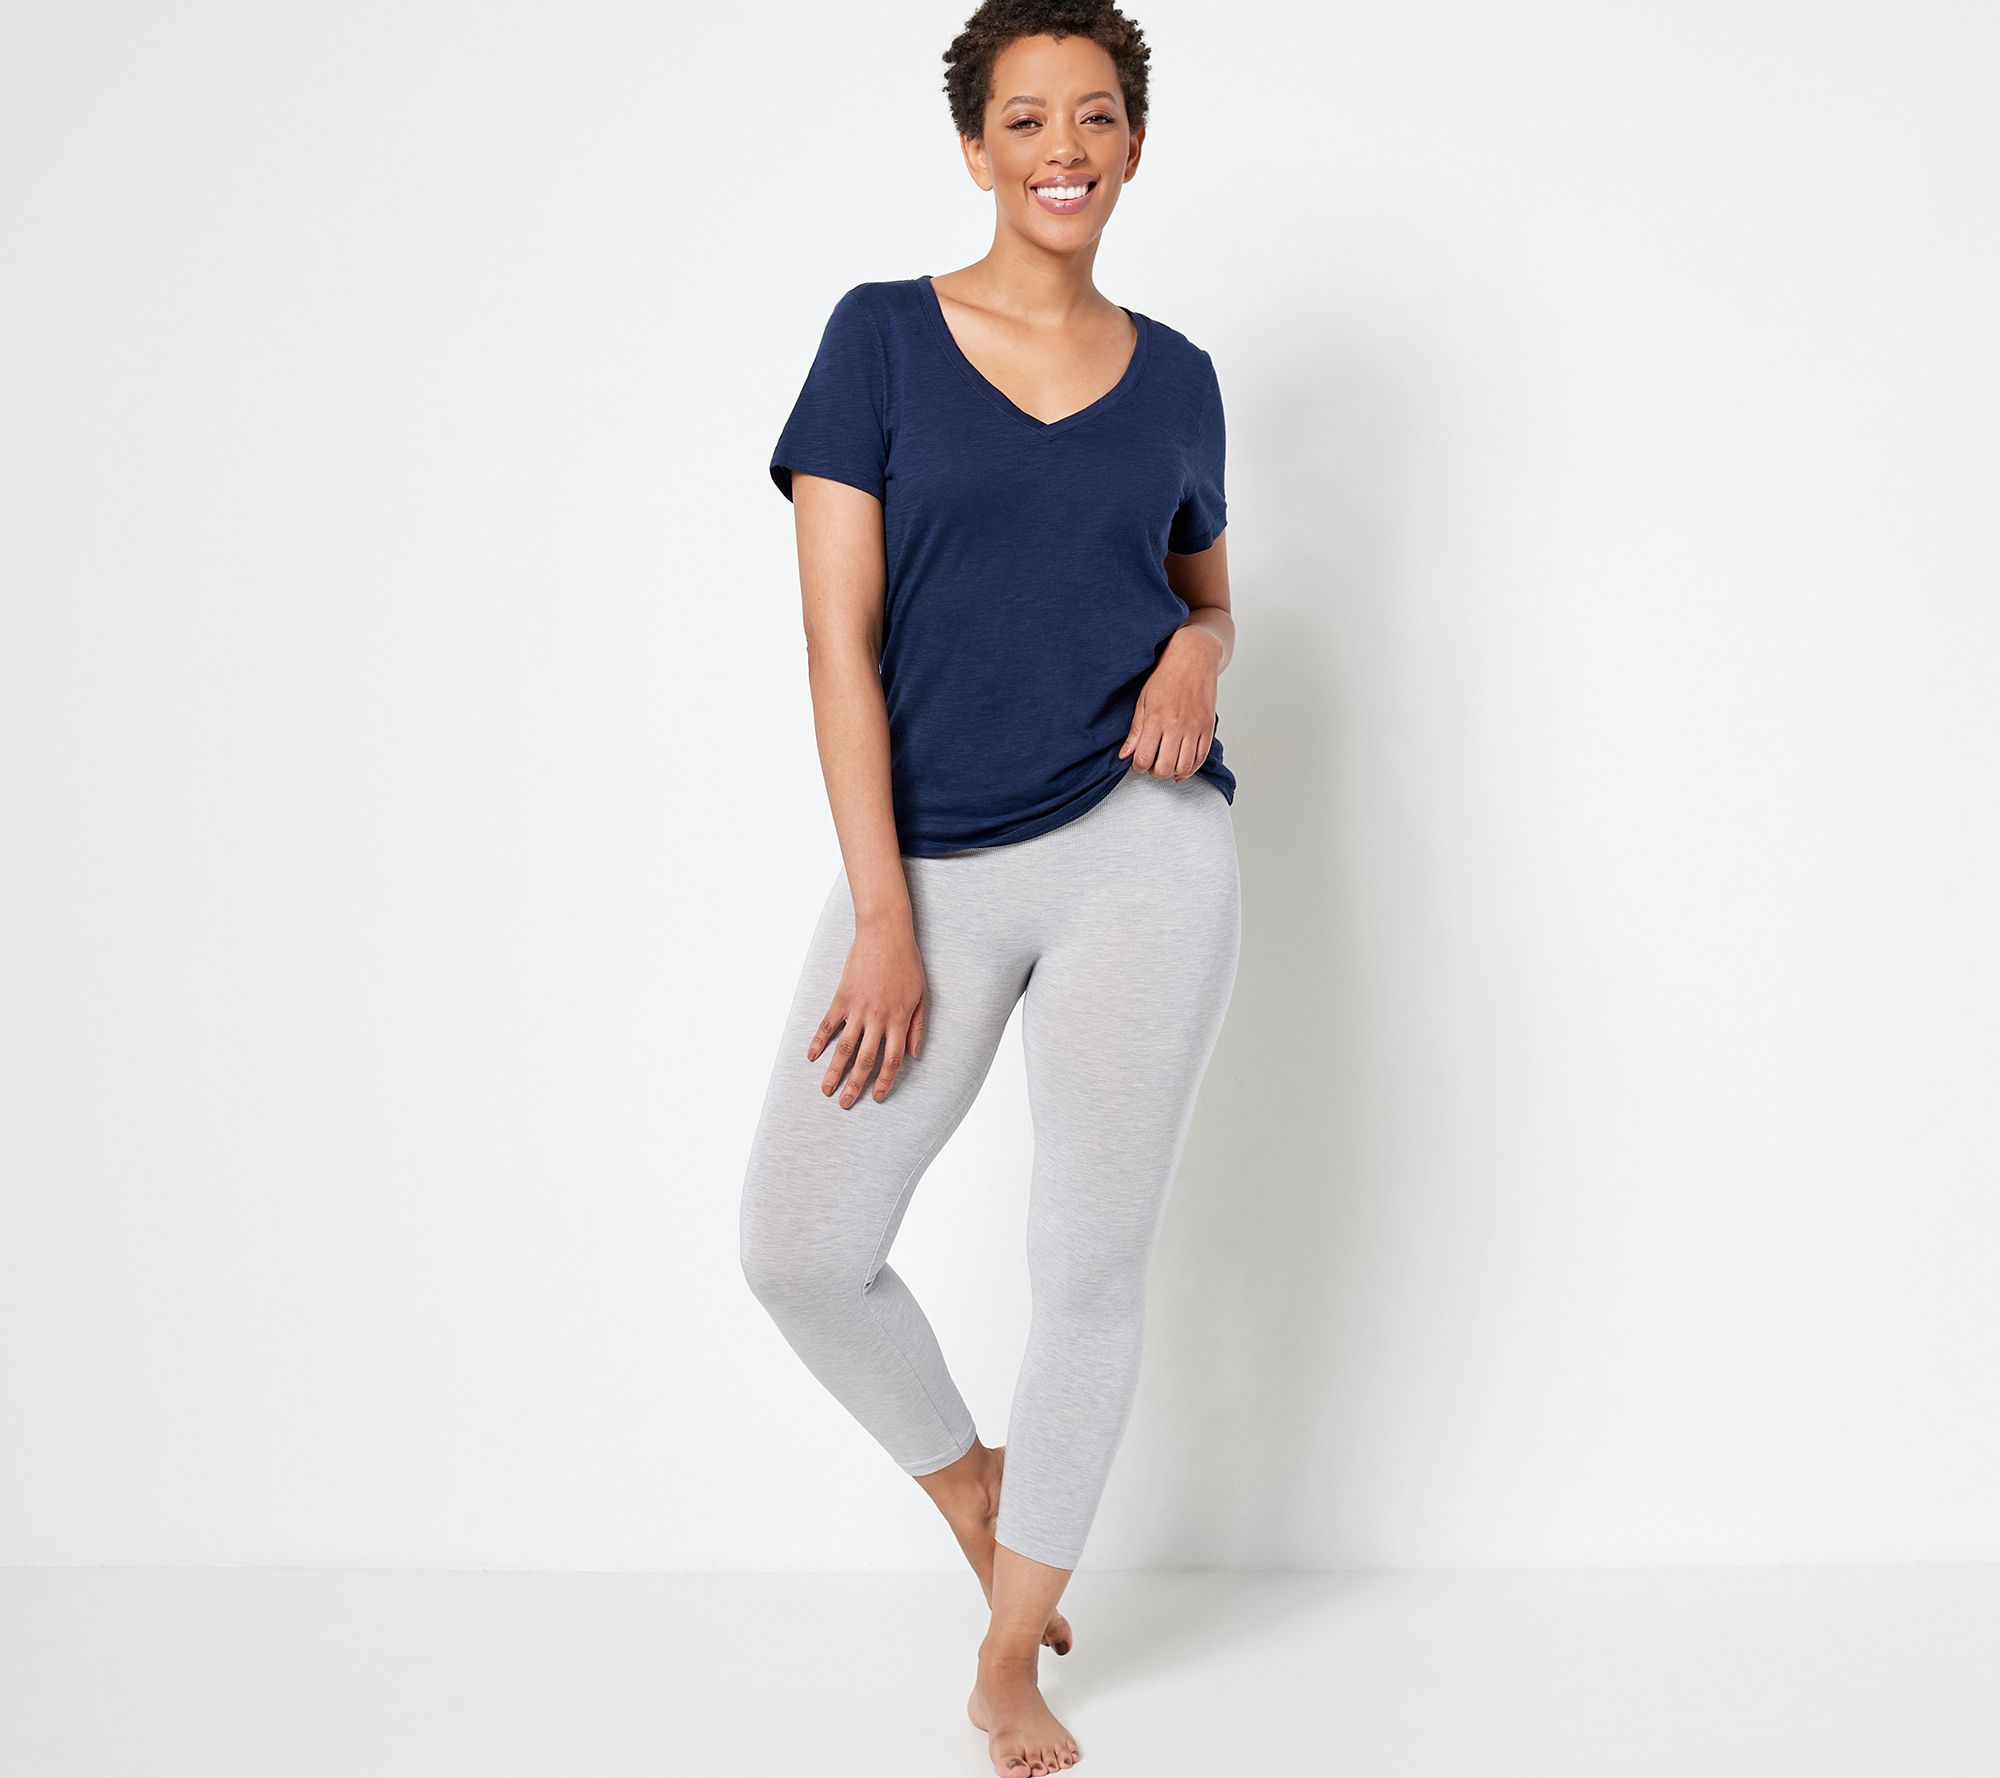 As Is Cuddl Duds Intimates Modal Seamless Cropped Legging - QVC